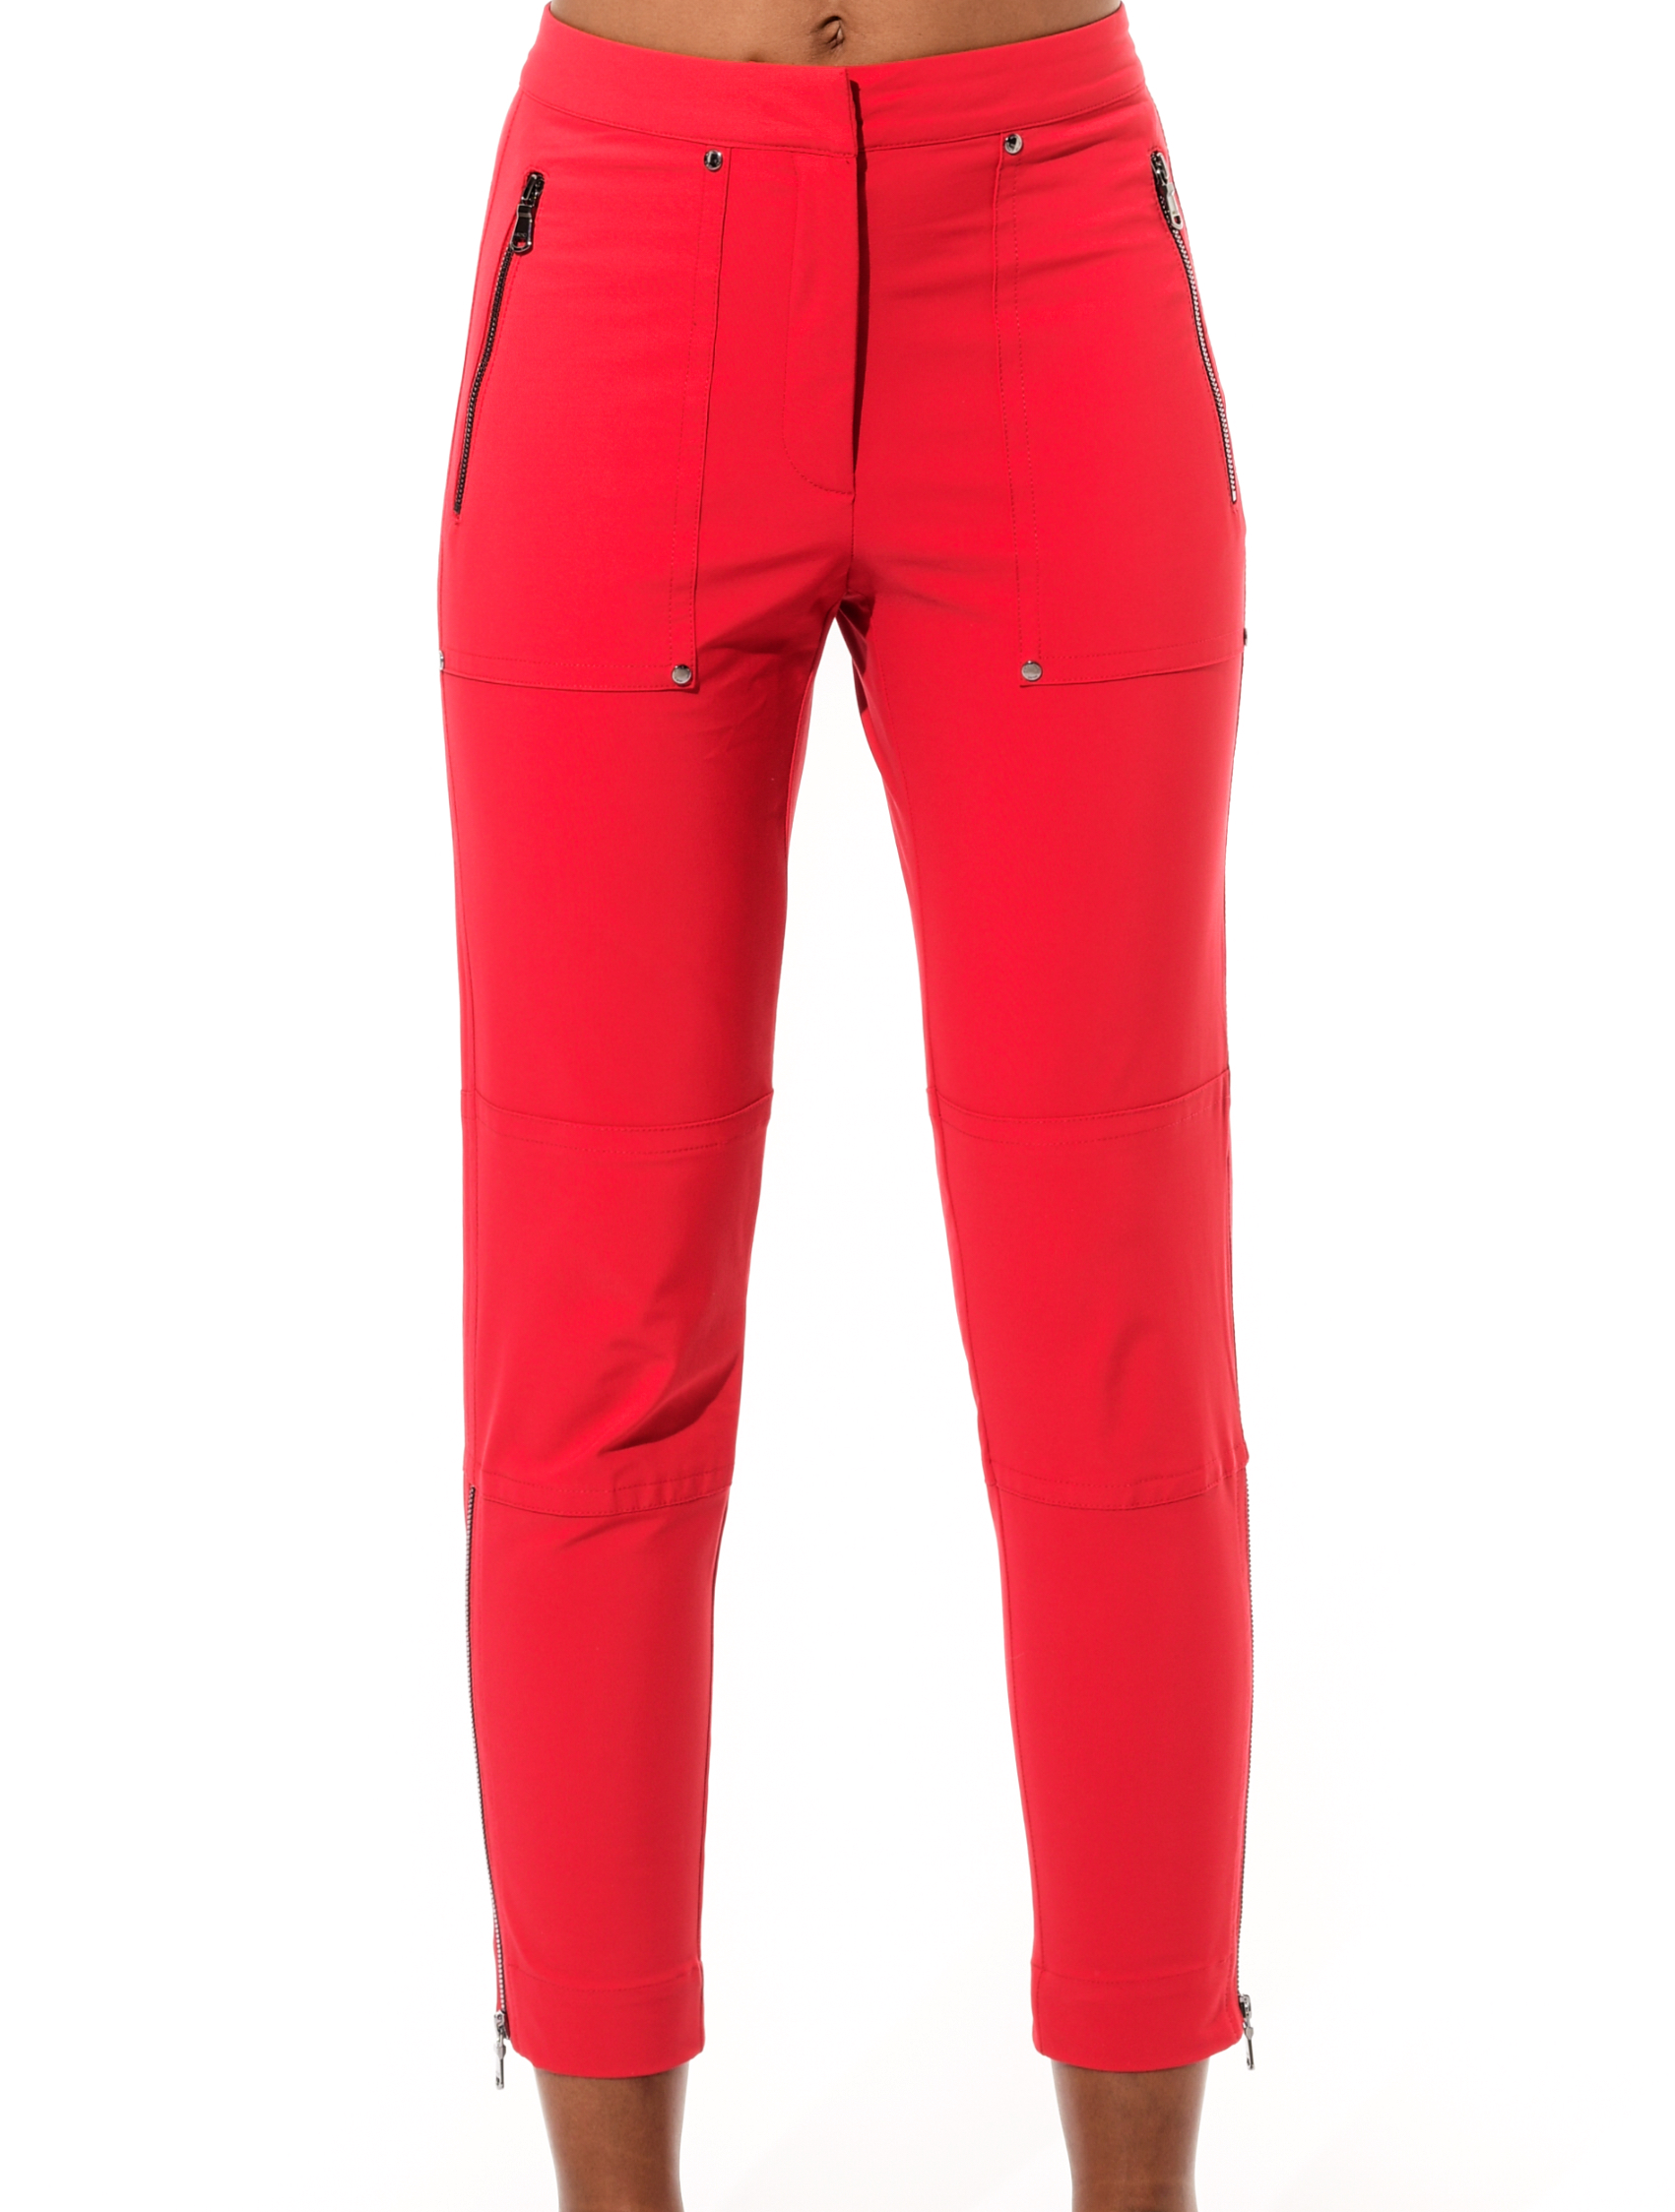 4way Stretch Slim Fit Cargo Pants red